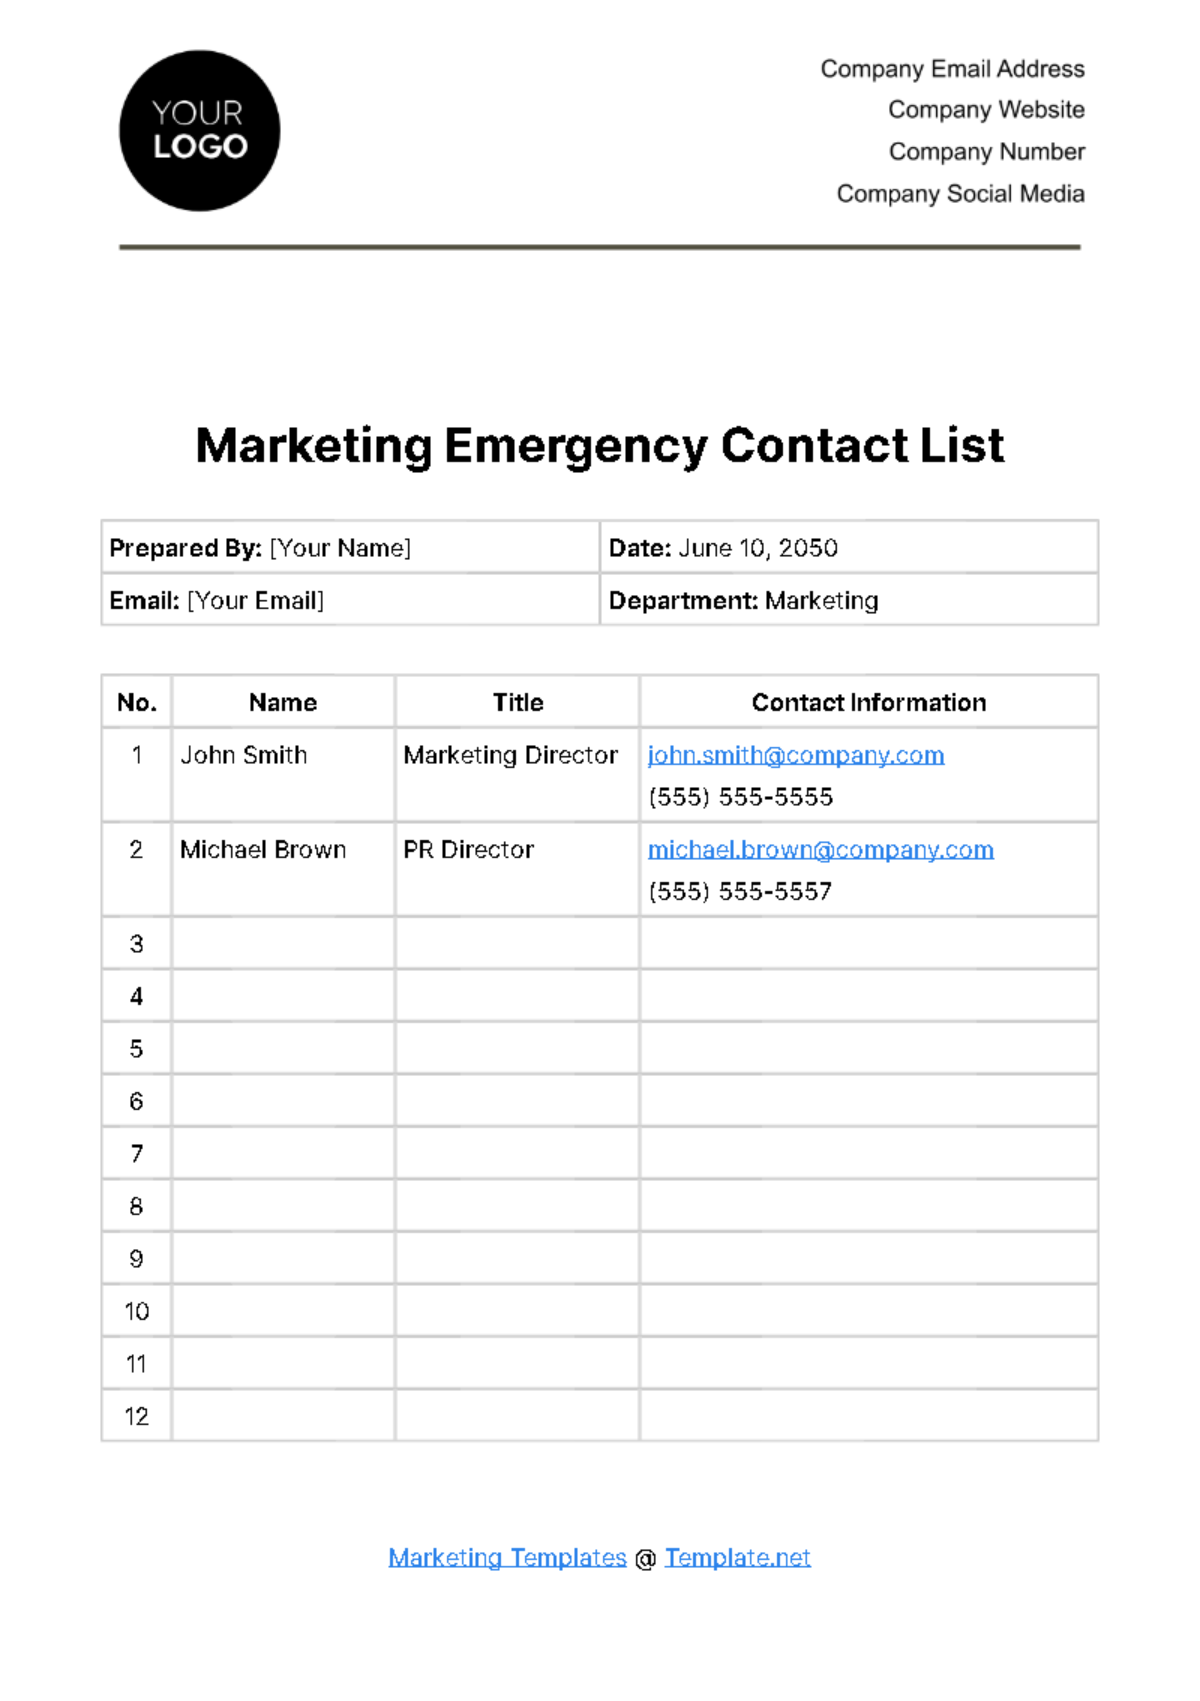 Free Marketing Emergency Contact List Template